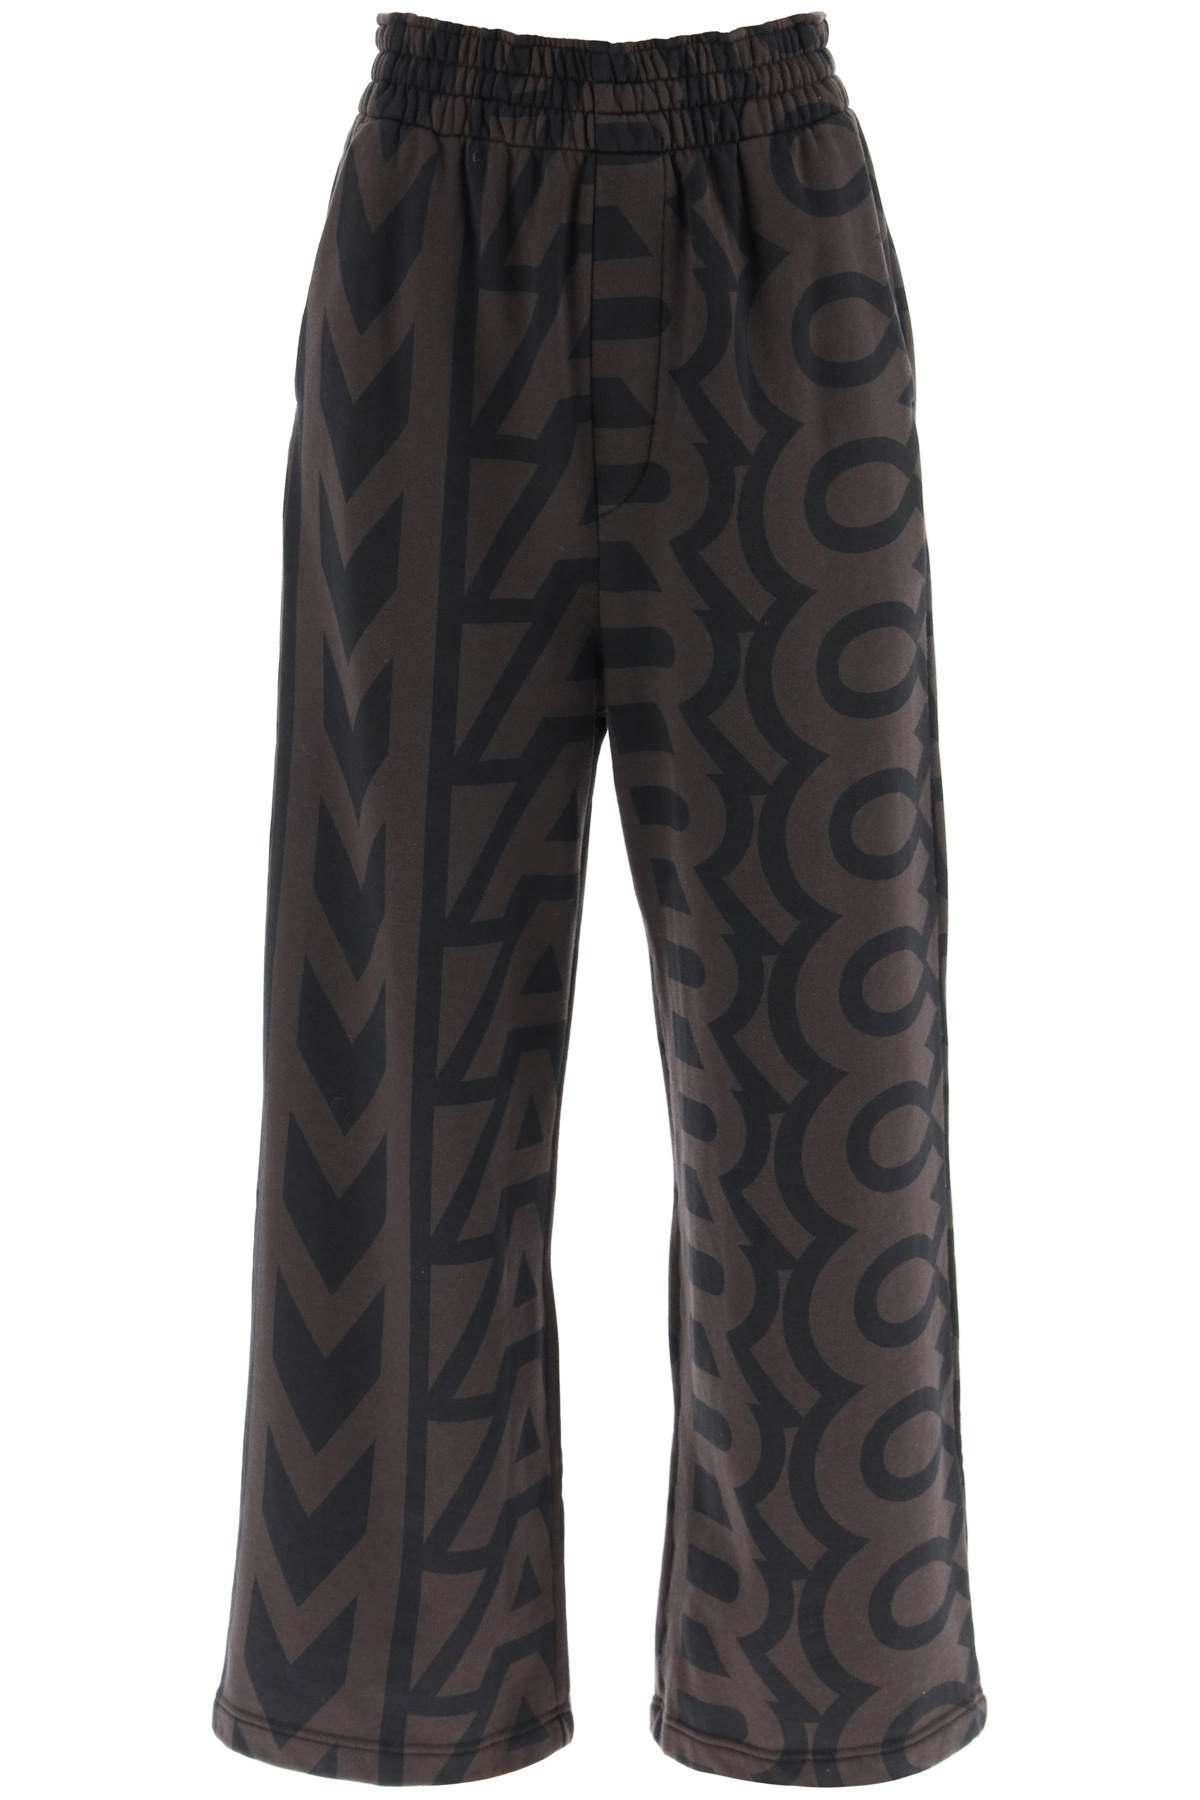 Marc Jacobs The Monogram Oversize Sweatpants In Black Charcoal (brown)